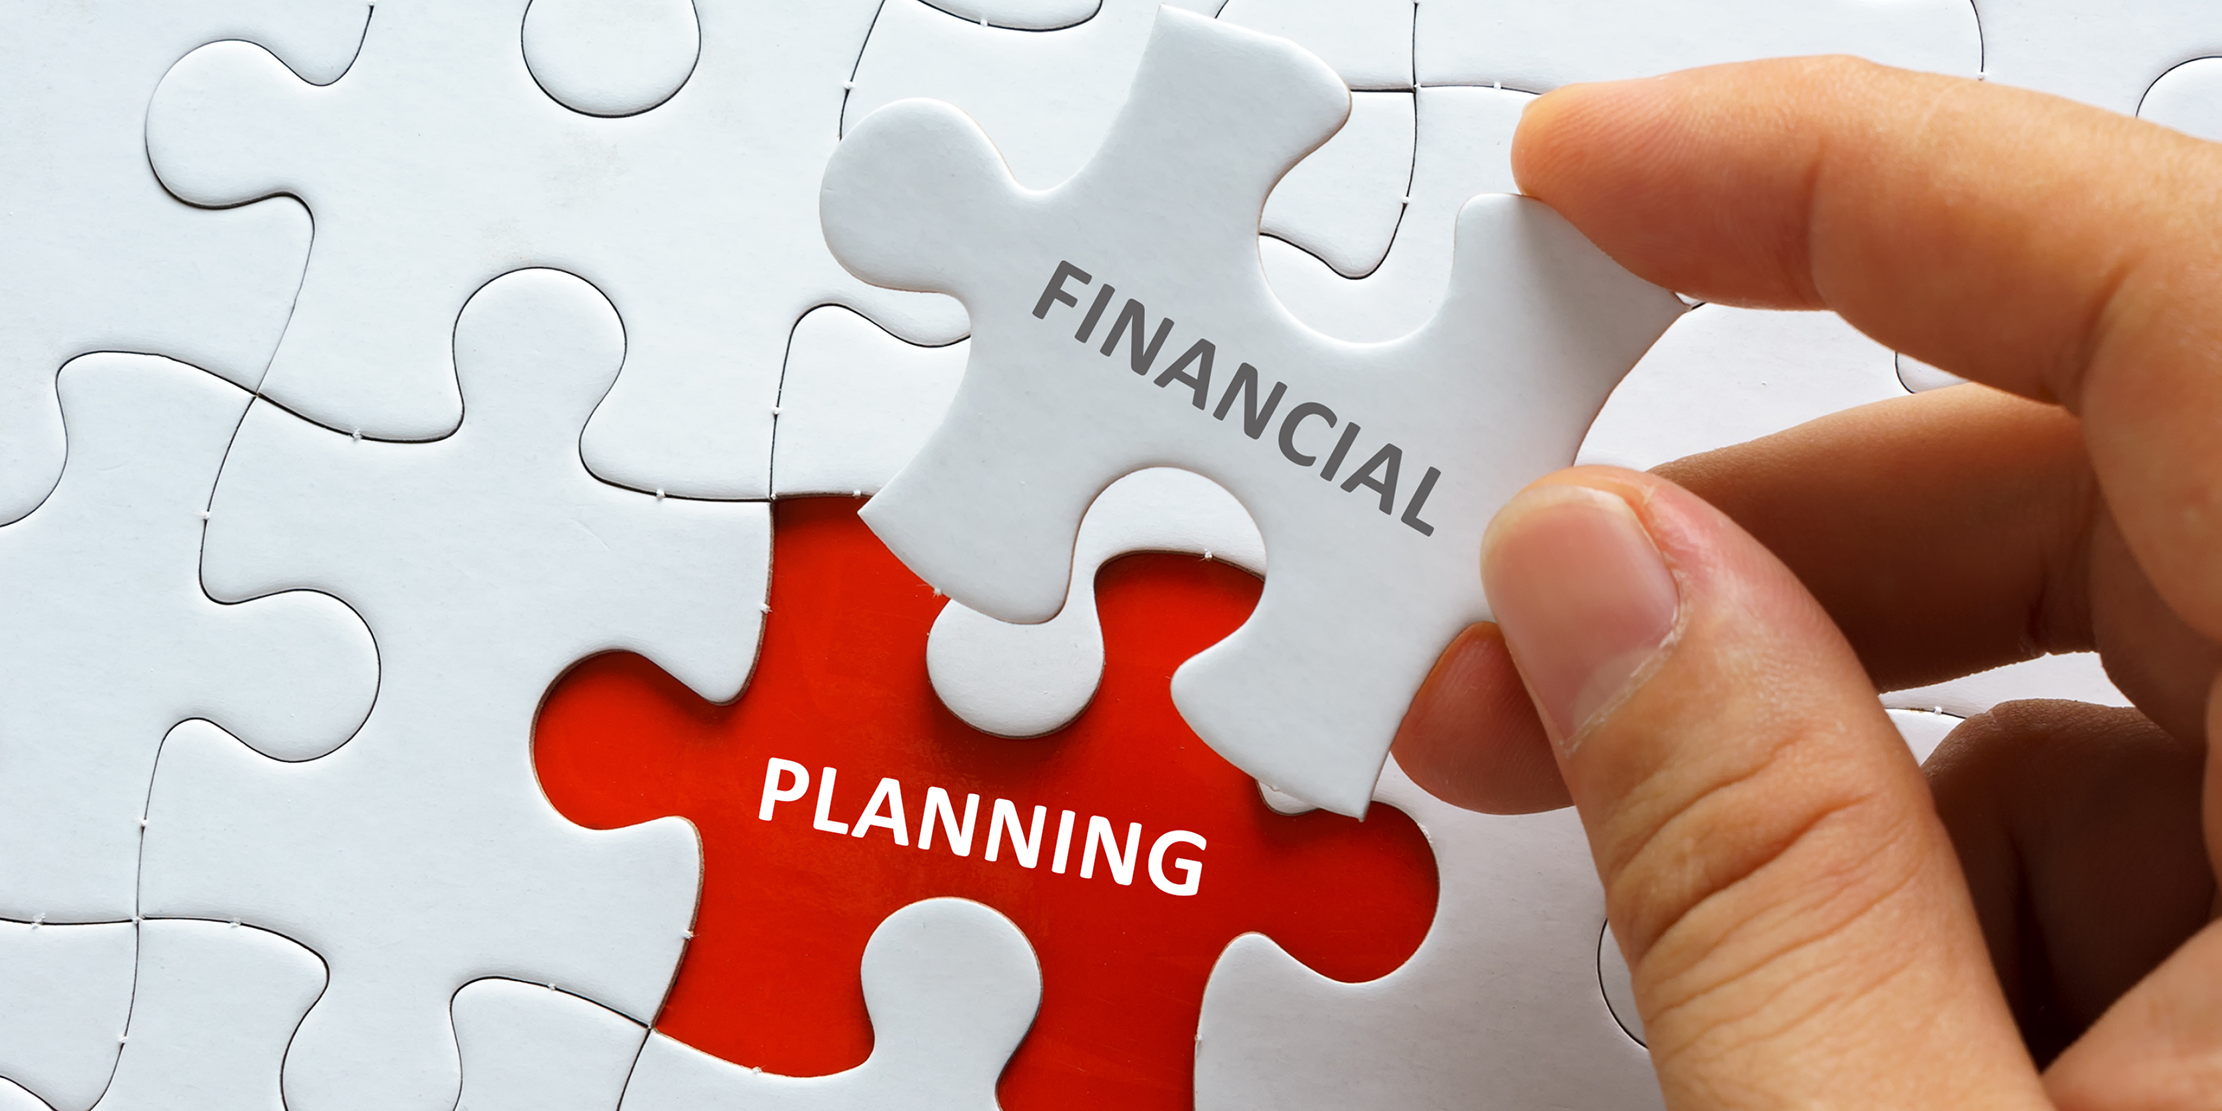 Expert recommended ways to review your financial plan and rebalance it